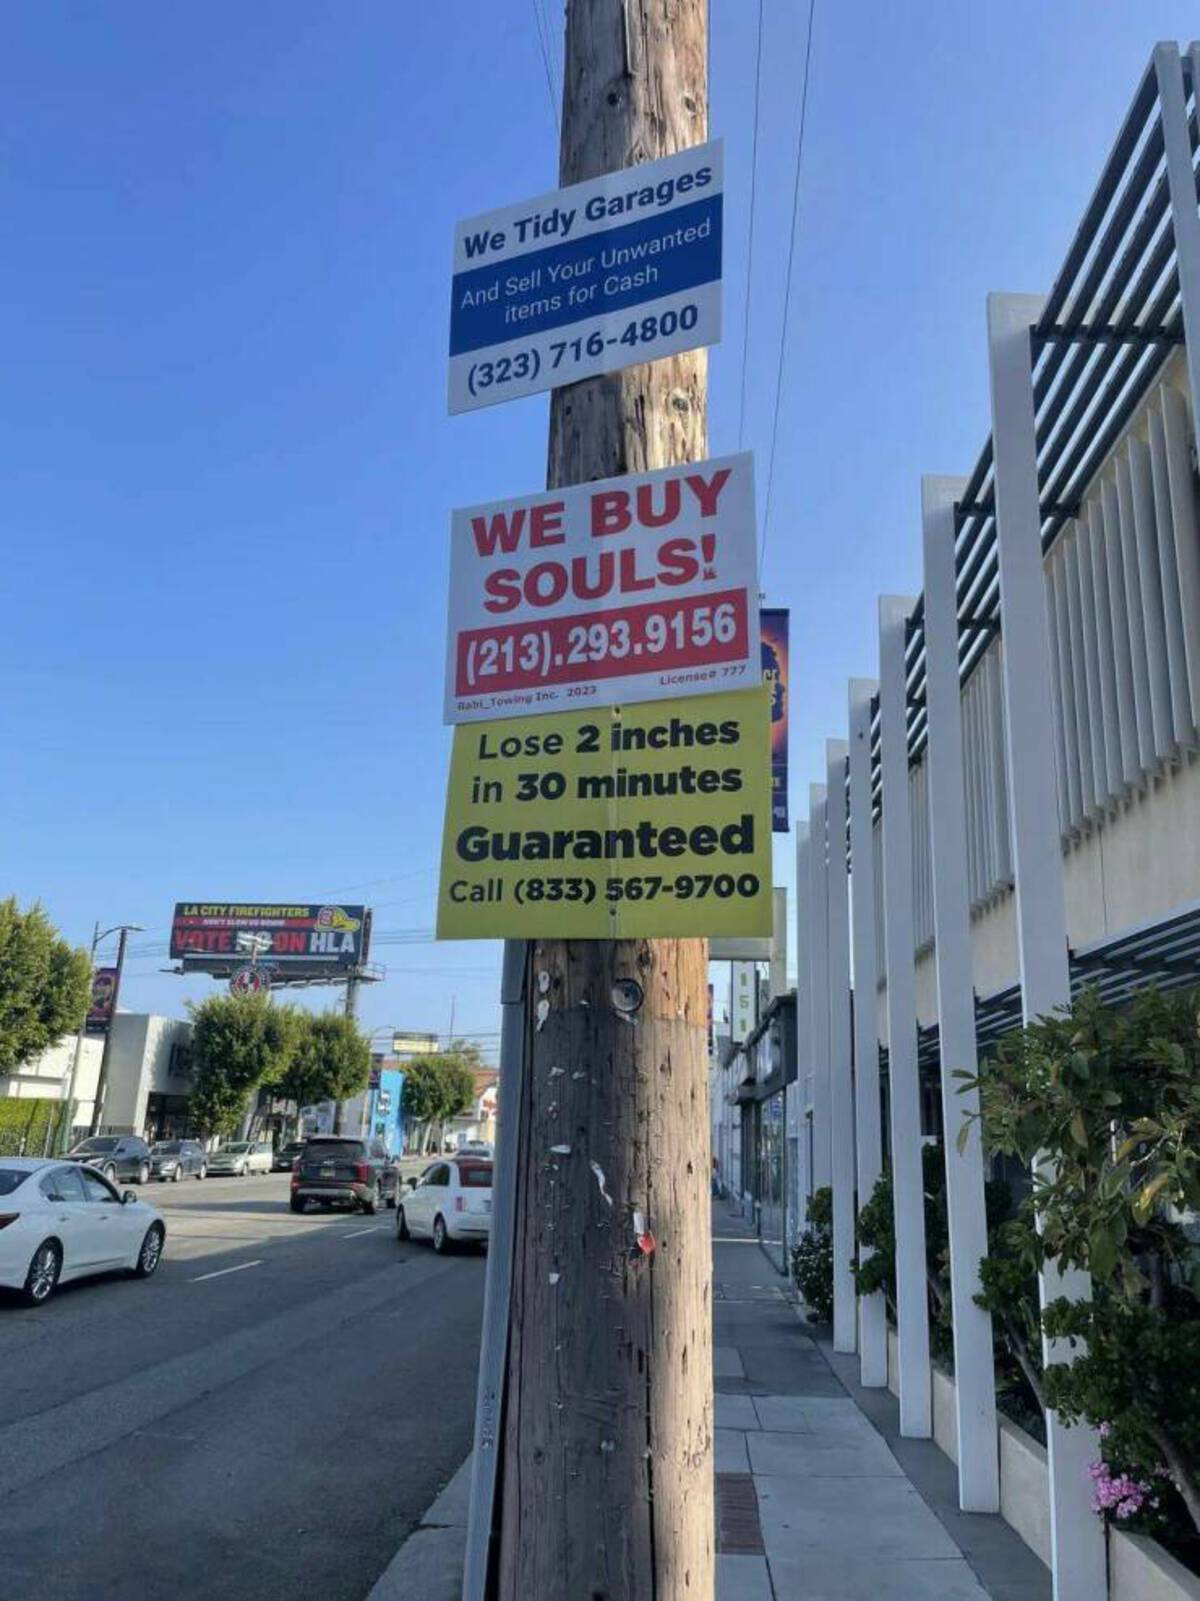 street sign - We Tidy Garages And Sell Your Unwanted items for Cash 323 7164800 La City Firefighters Vote Ns On Hla We Buy Souls! 213.293.9156 Rabi Towing Inc. 2023 License 777 Lose 2 inches in 30 minutes Guaranteed Call 833 5679700